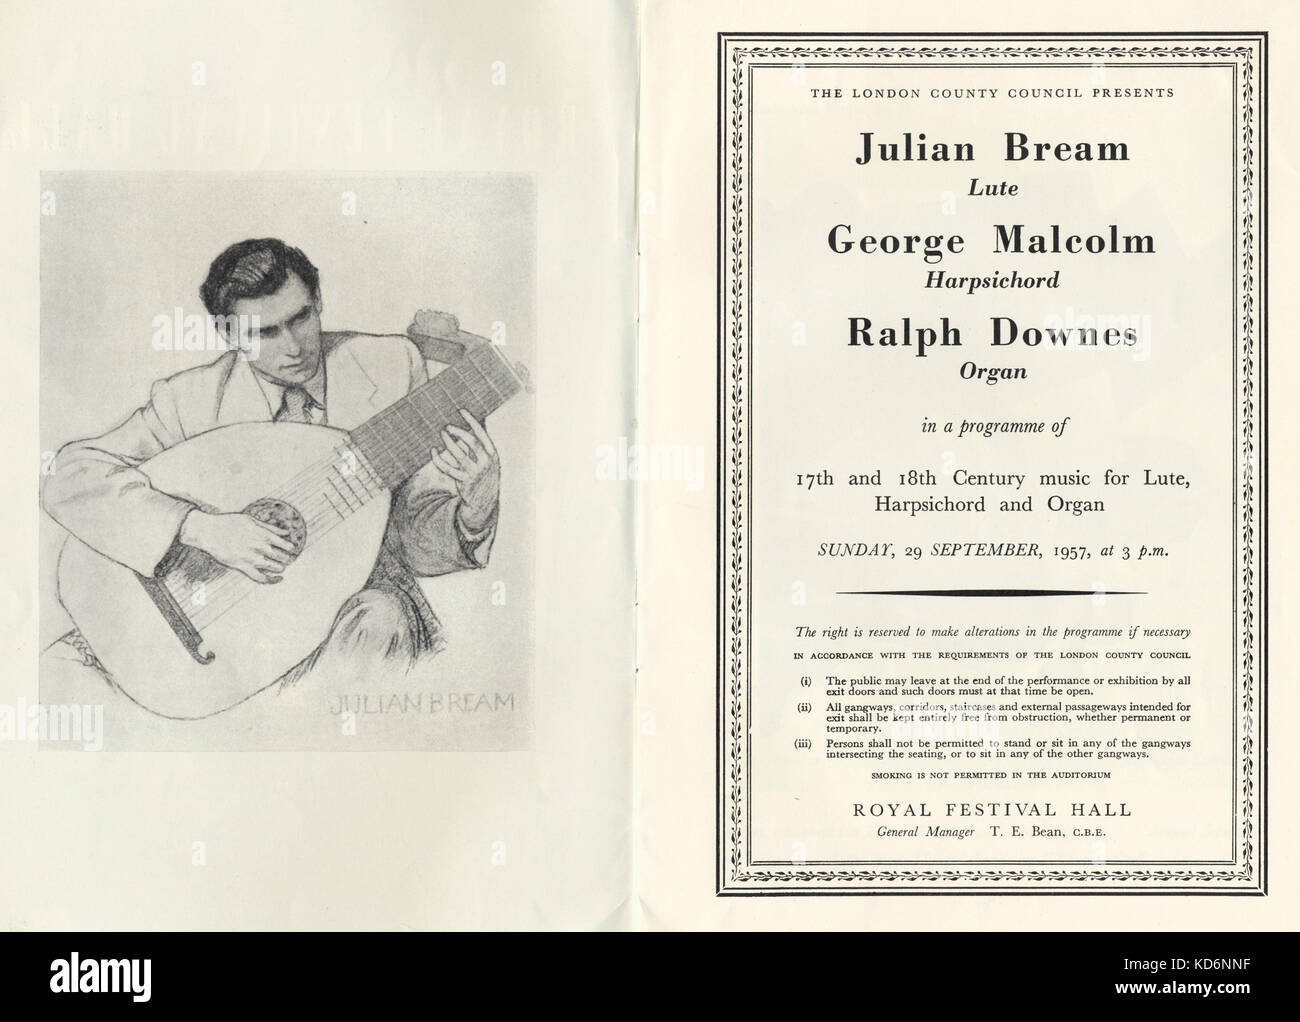 Julian Bream playing the lute in London Royal Festival Hall concert programme drawing of Julian Bream, born 15 July 1933. Concert of 17th & 18th Century music for Lute, Harpsicord and Organ with George Malcolm and Ralph Downes. September 29, 1957. Stock Photo